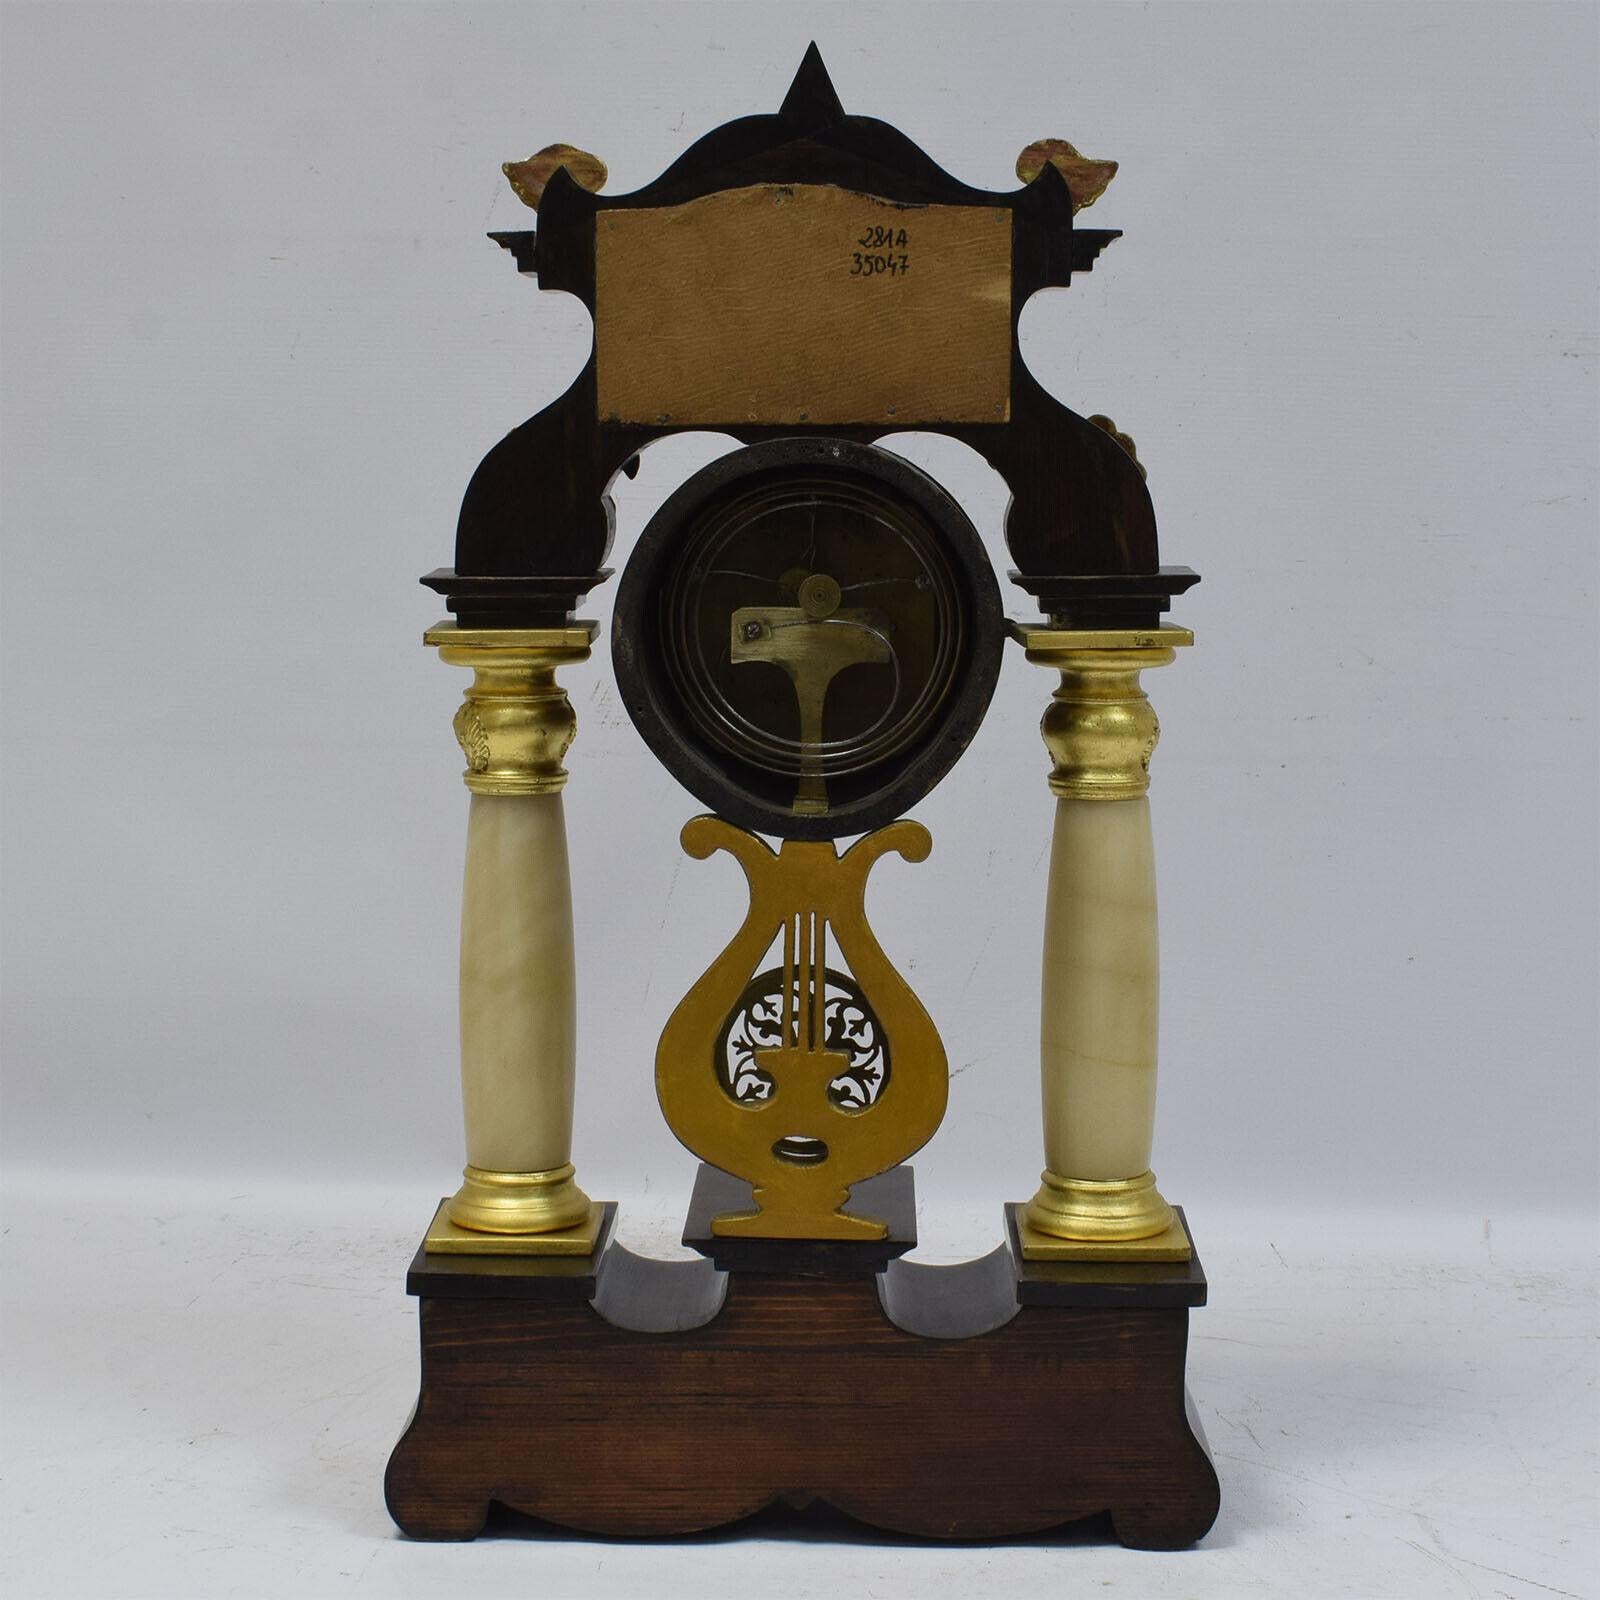 19th Century Functional Column Clock, Antique Mantel Clock with Portico, 1G03 In Fair Condition For Sale In Bordeaux, FR